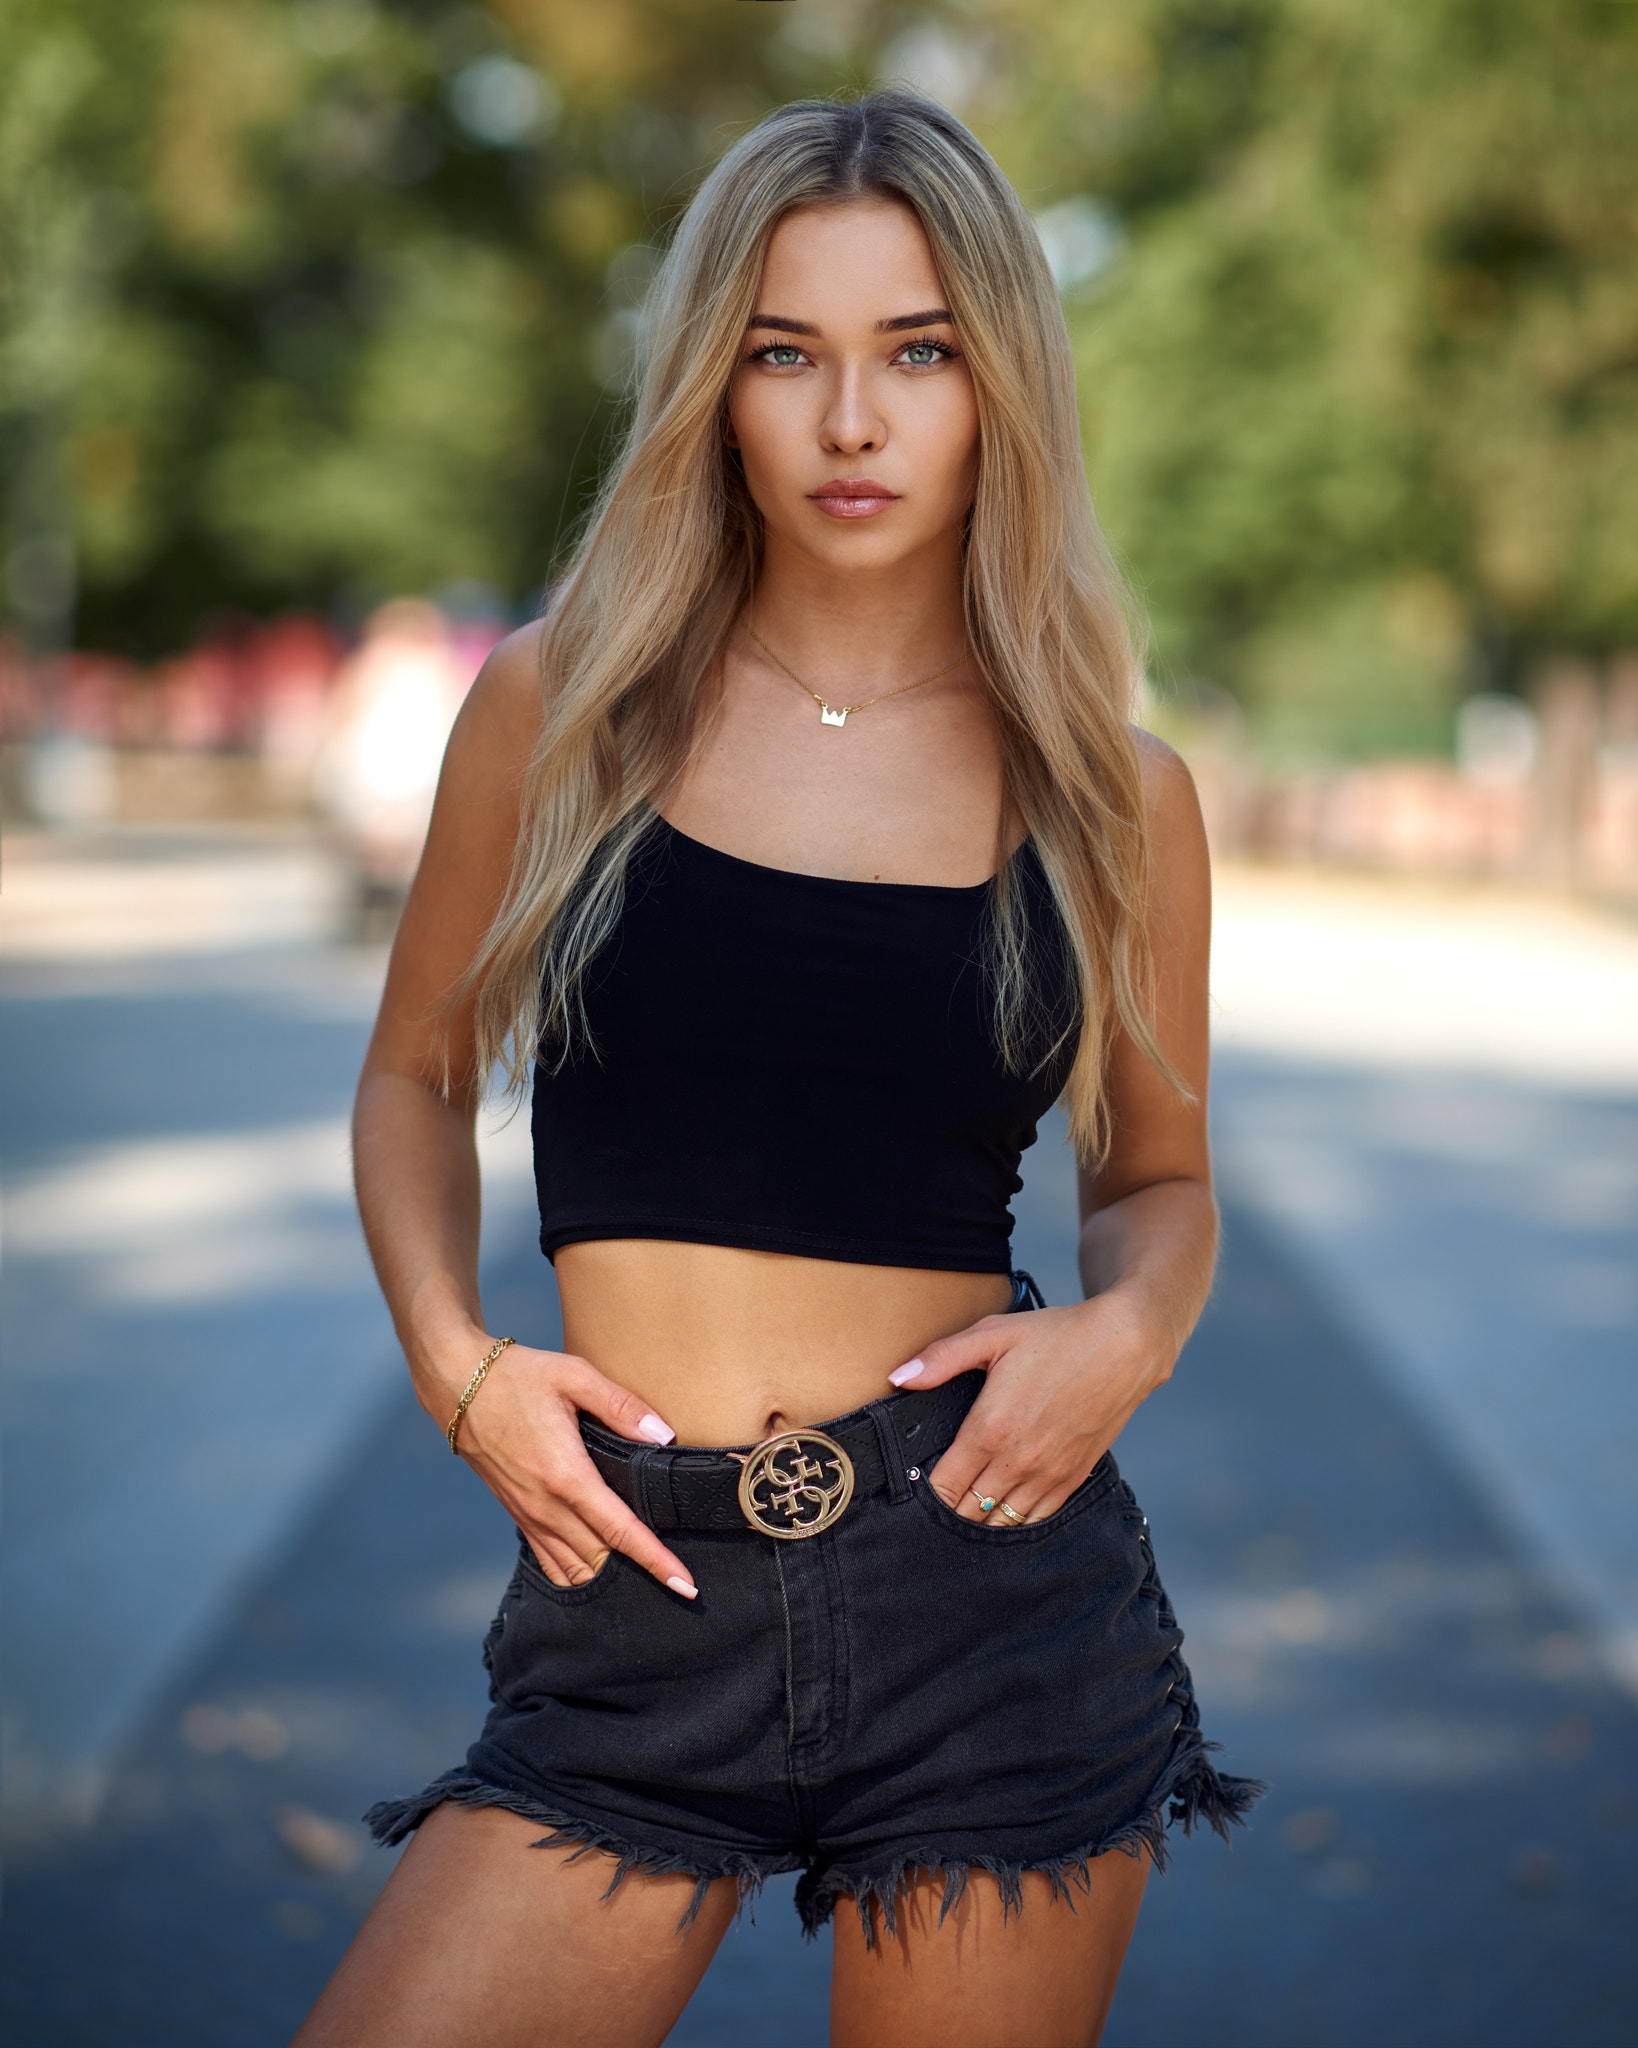 People 1638x2048 Bulinko Piotr women blonde long hair looking at viewer jewelry gold necklace tank top black clothing bracelets shorts hands in pockets outdoors depth of field black top short tops frontal view